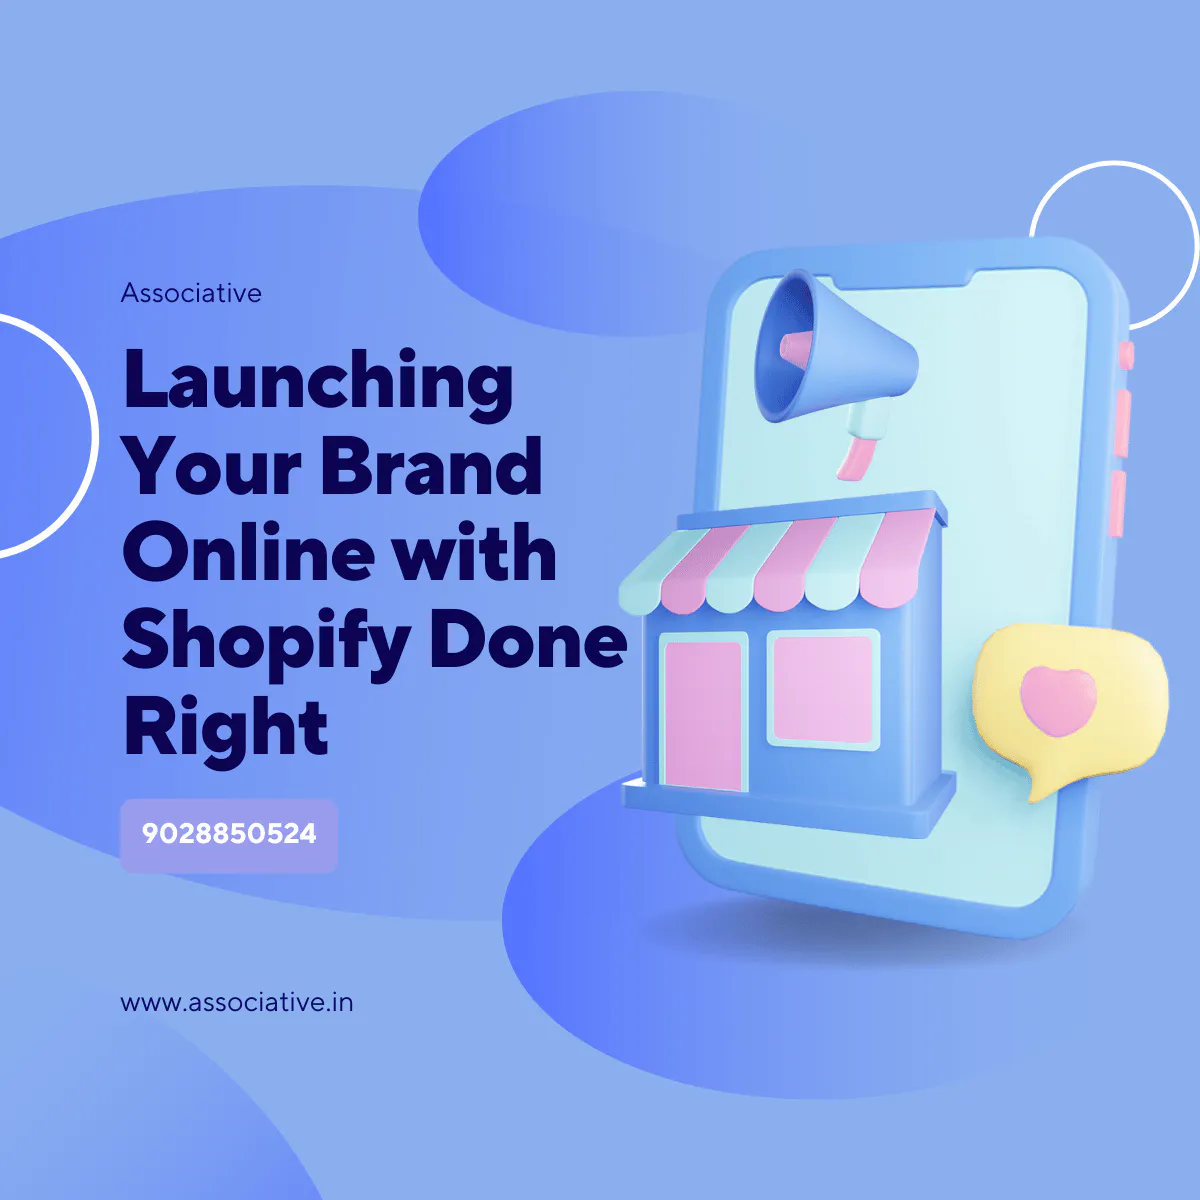 Launching Your Brand Online with Shopify Done Right